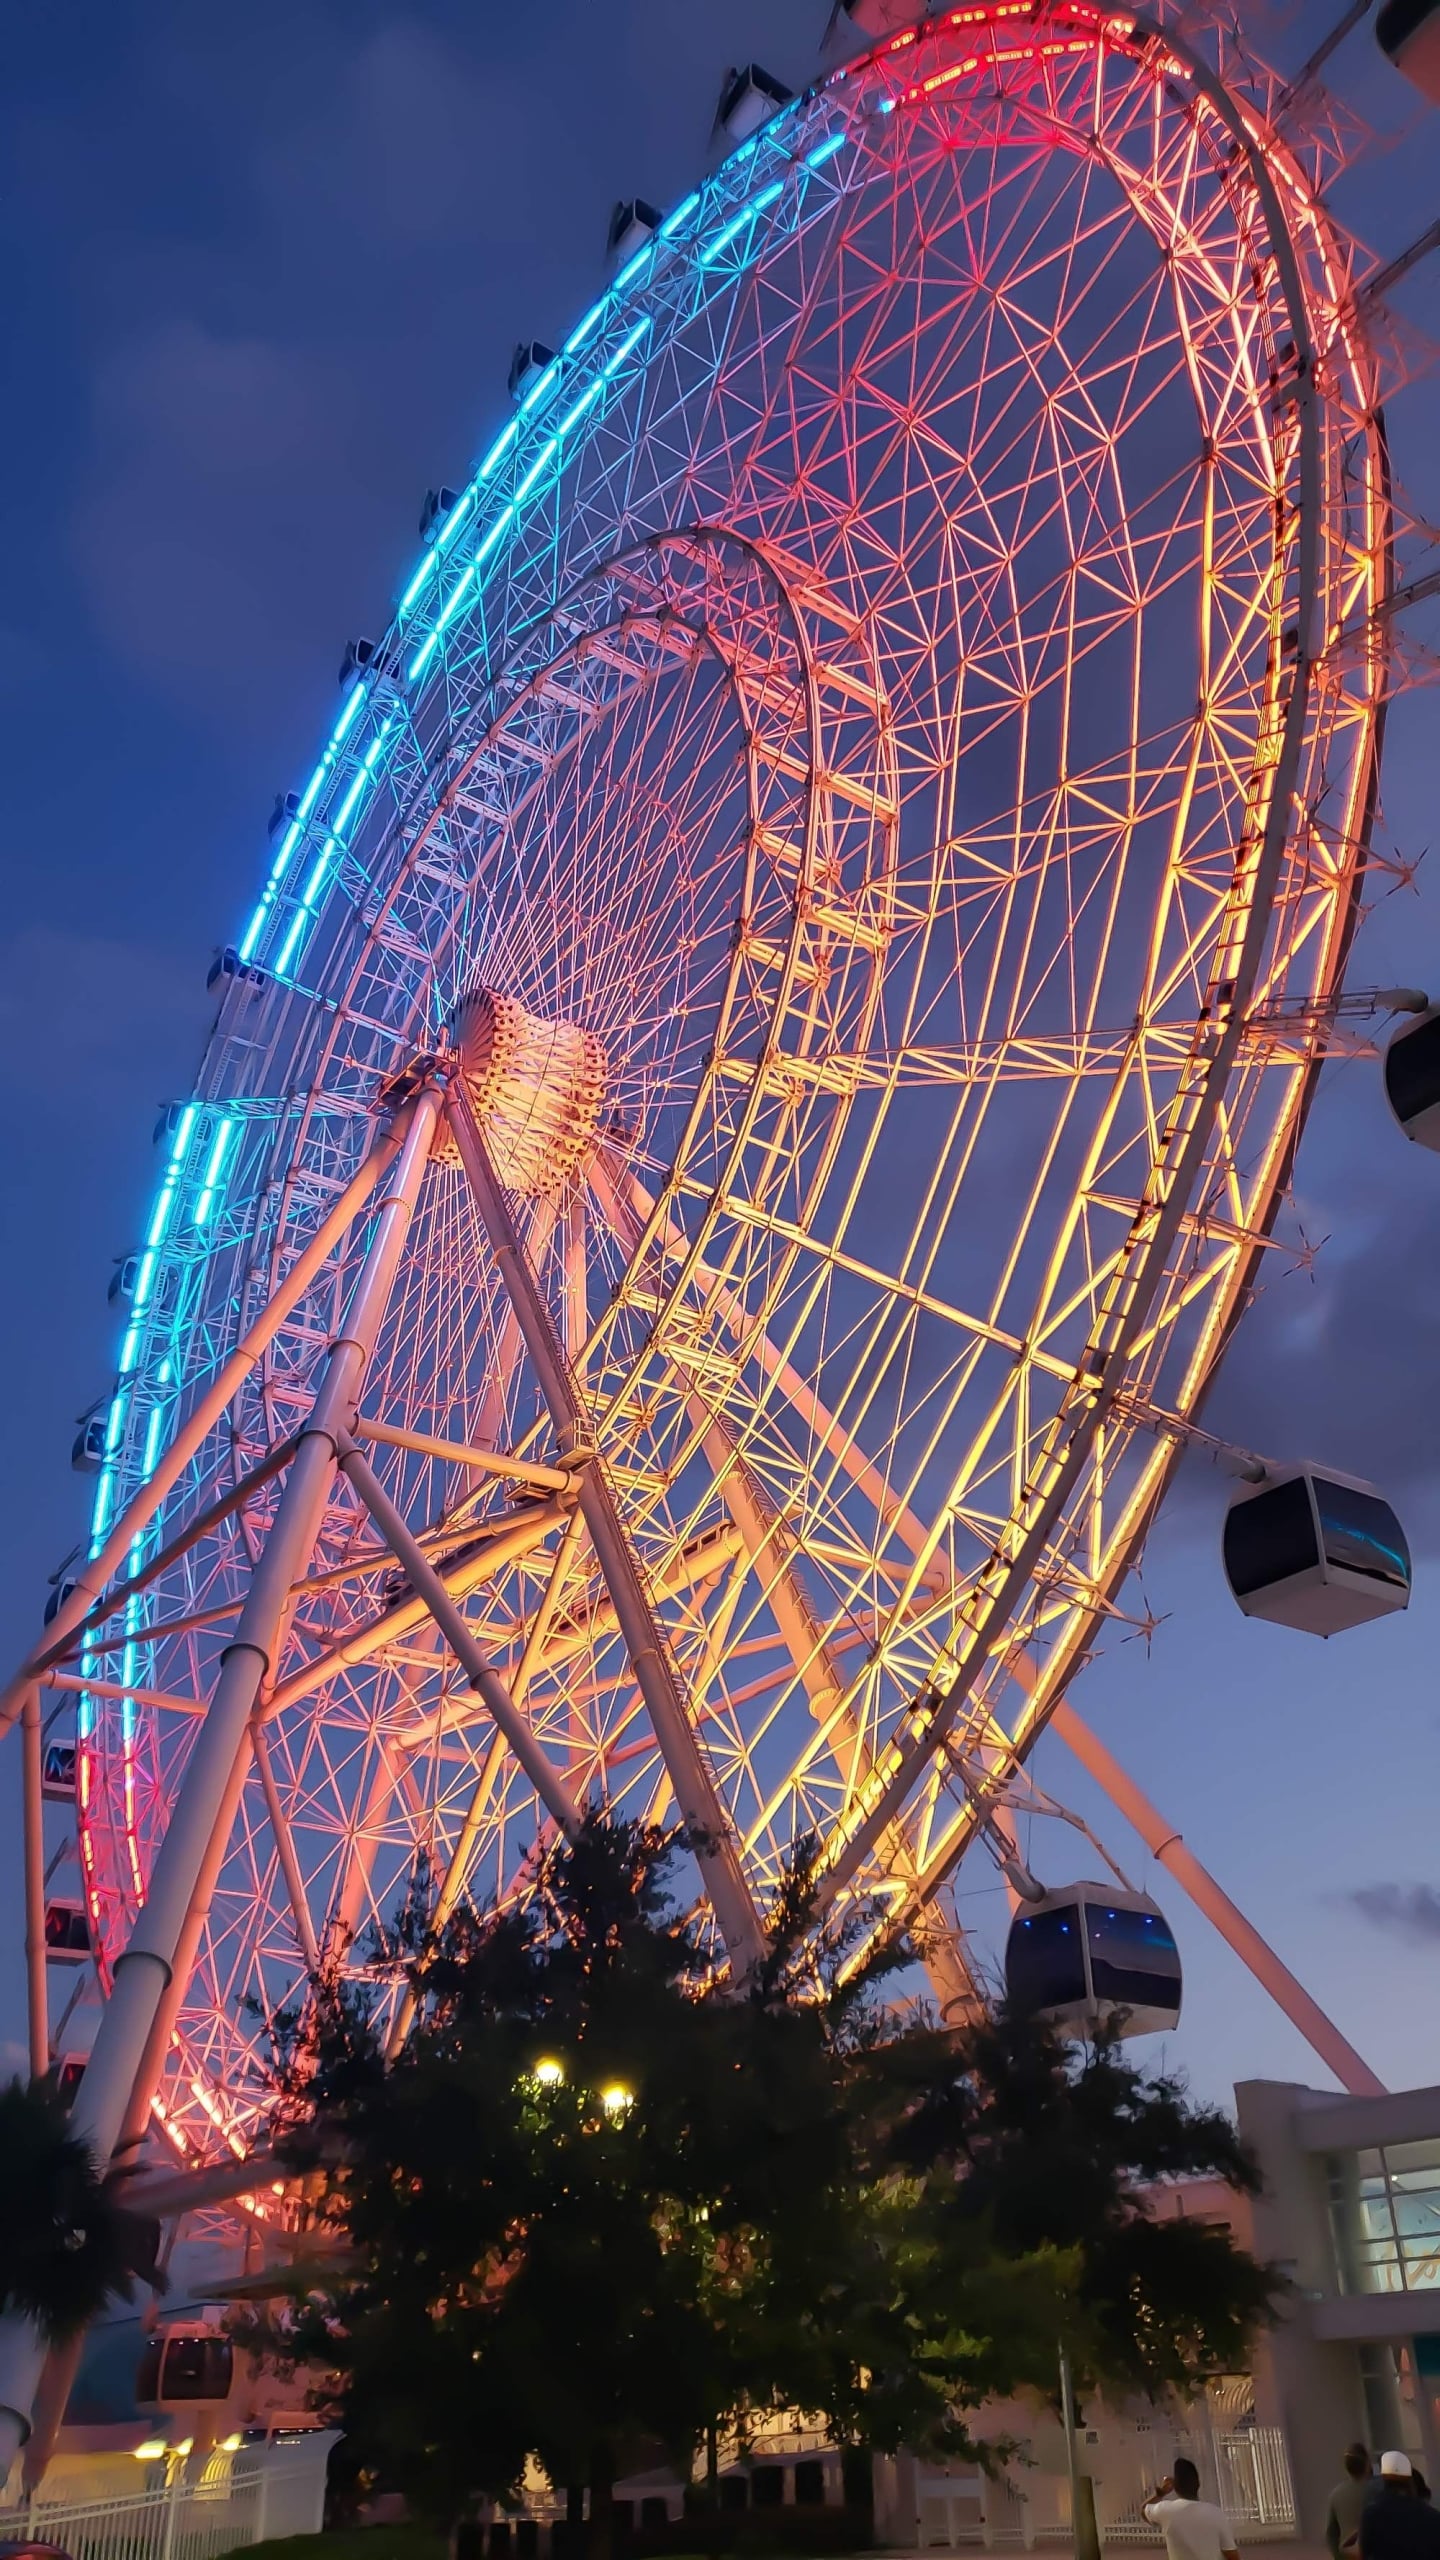 A colorful ferris wheel at night.